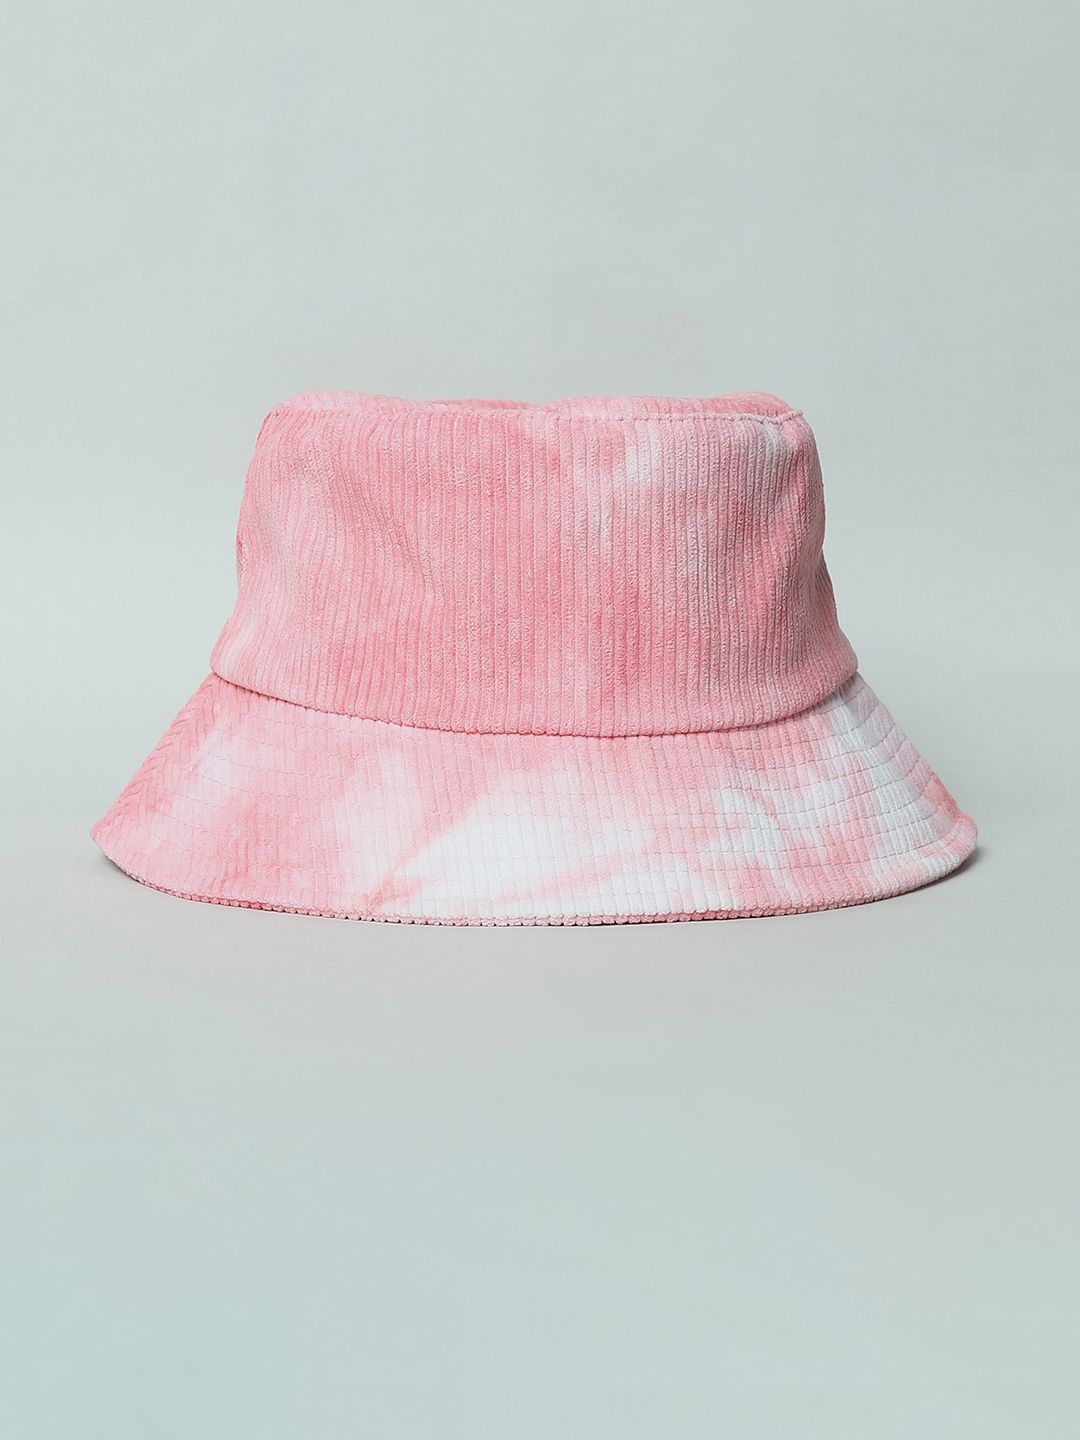 ONLY Women Pink Printed Bucket Hat Price in India